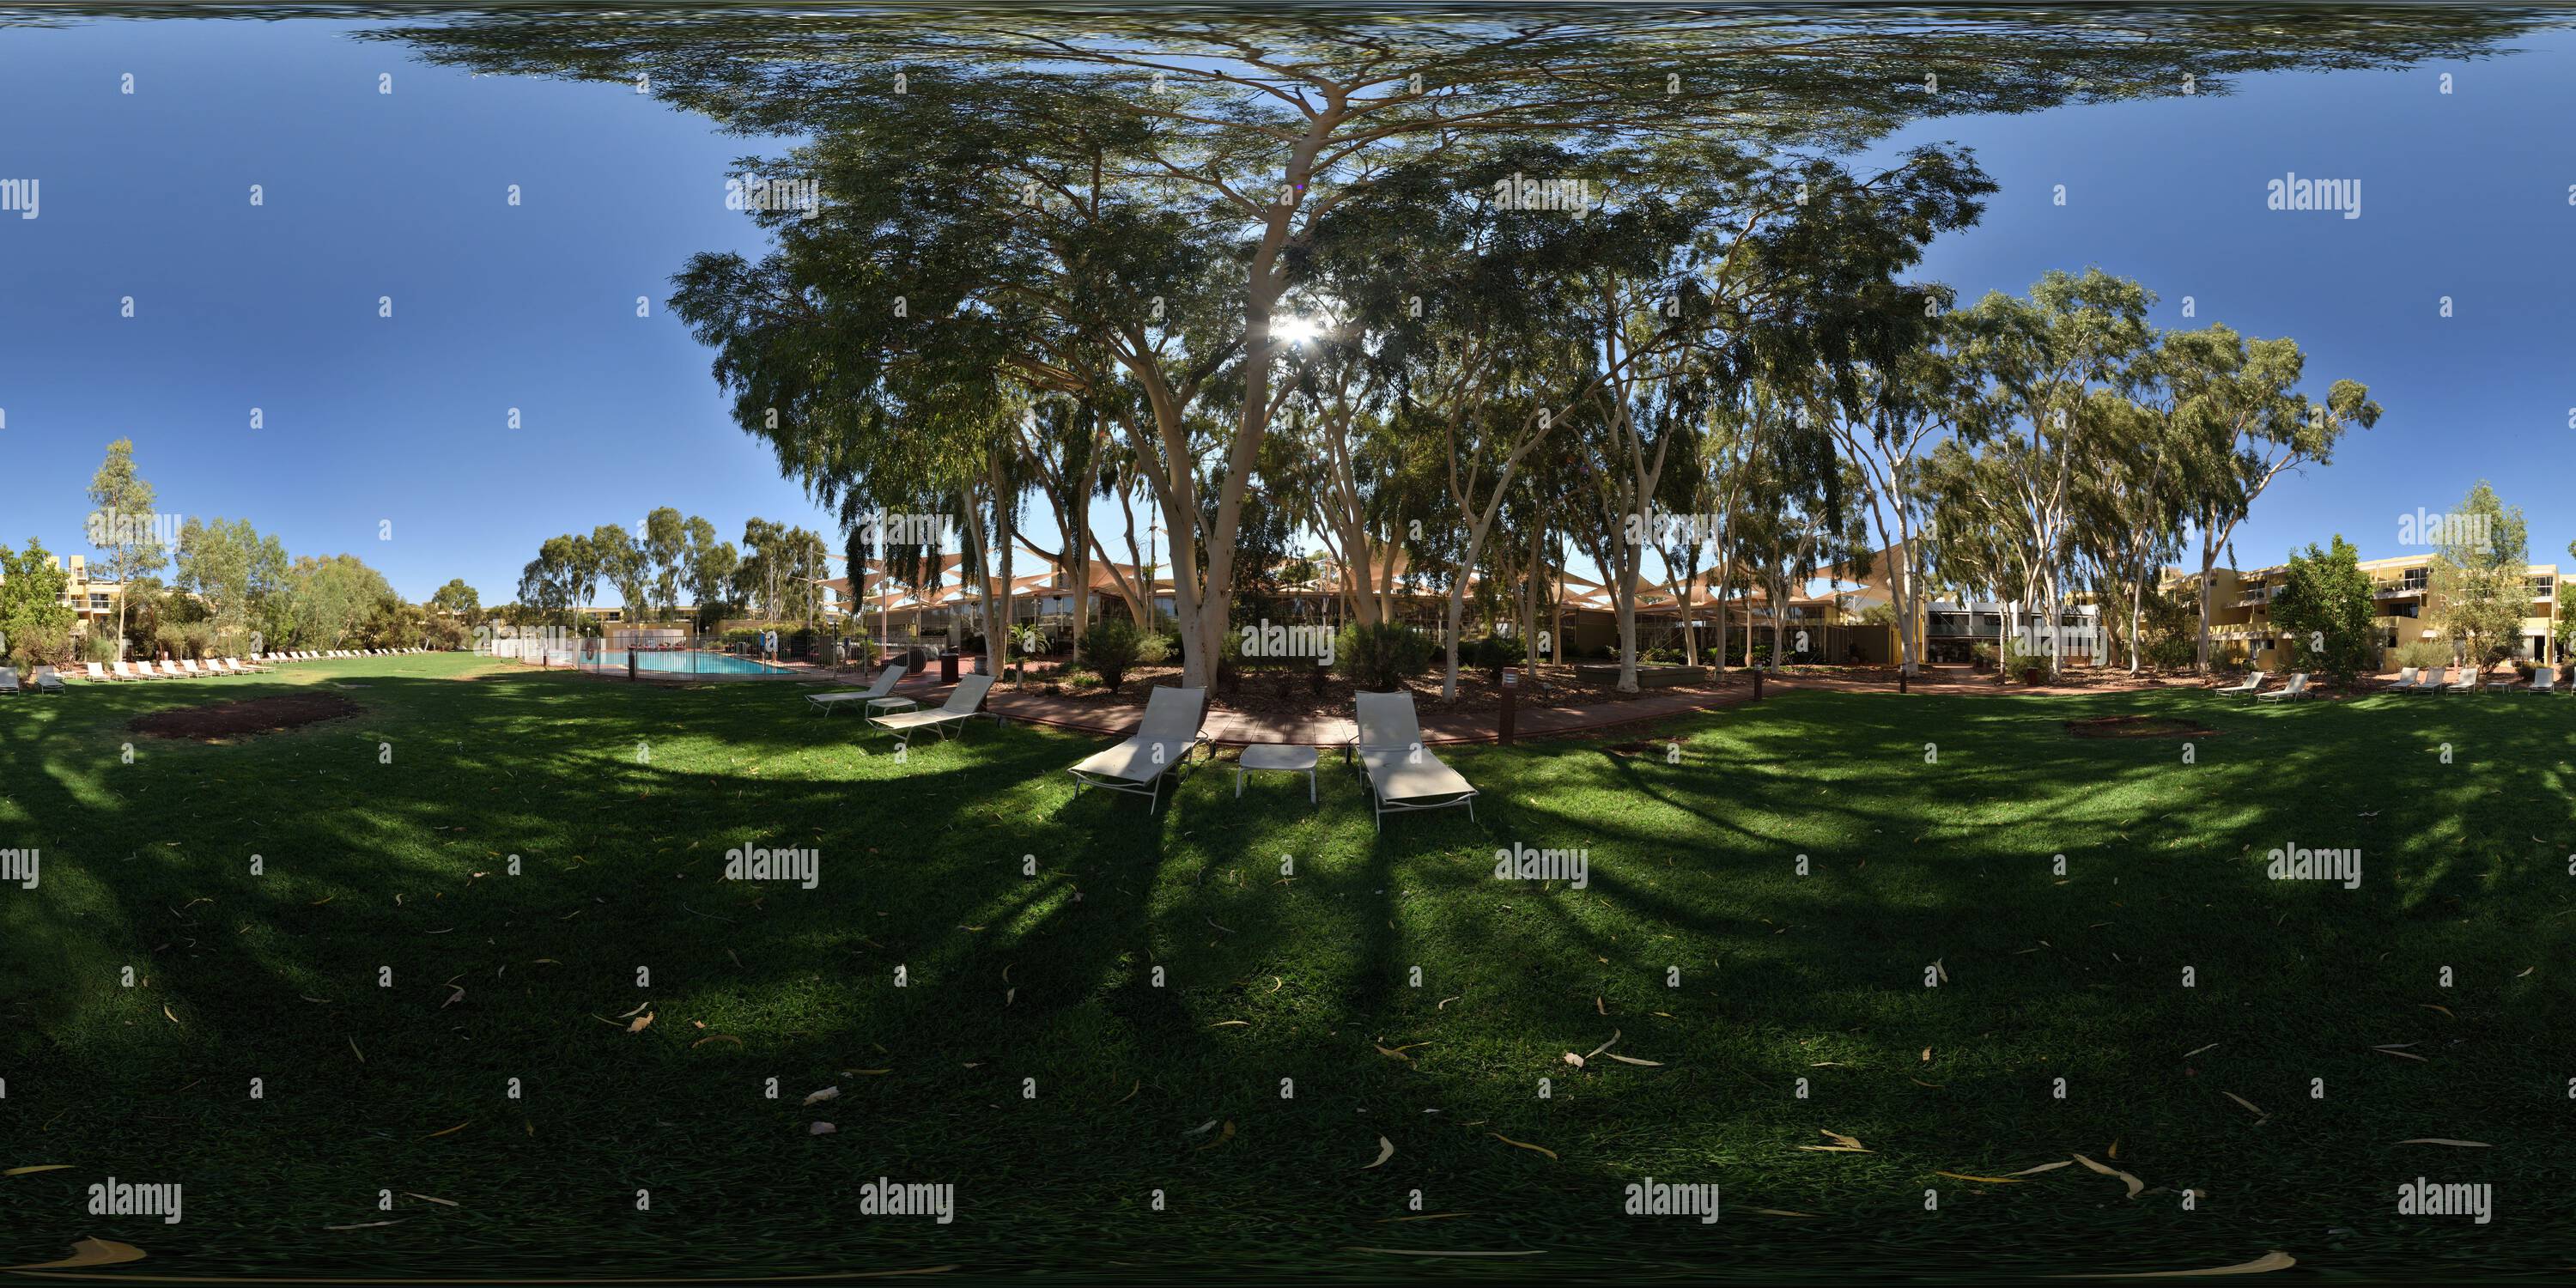 360 degree panoramic view of Sun lounges and Gum trees, Grassed Area and Fenced Pool at Sails Resort, Yulara, Northern Territory, 360° Panorama